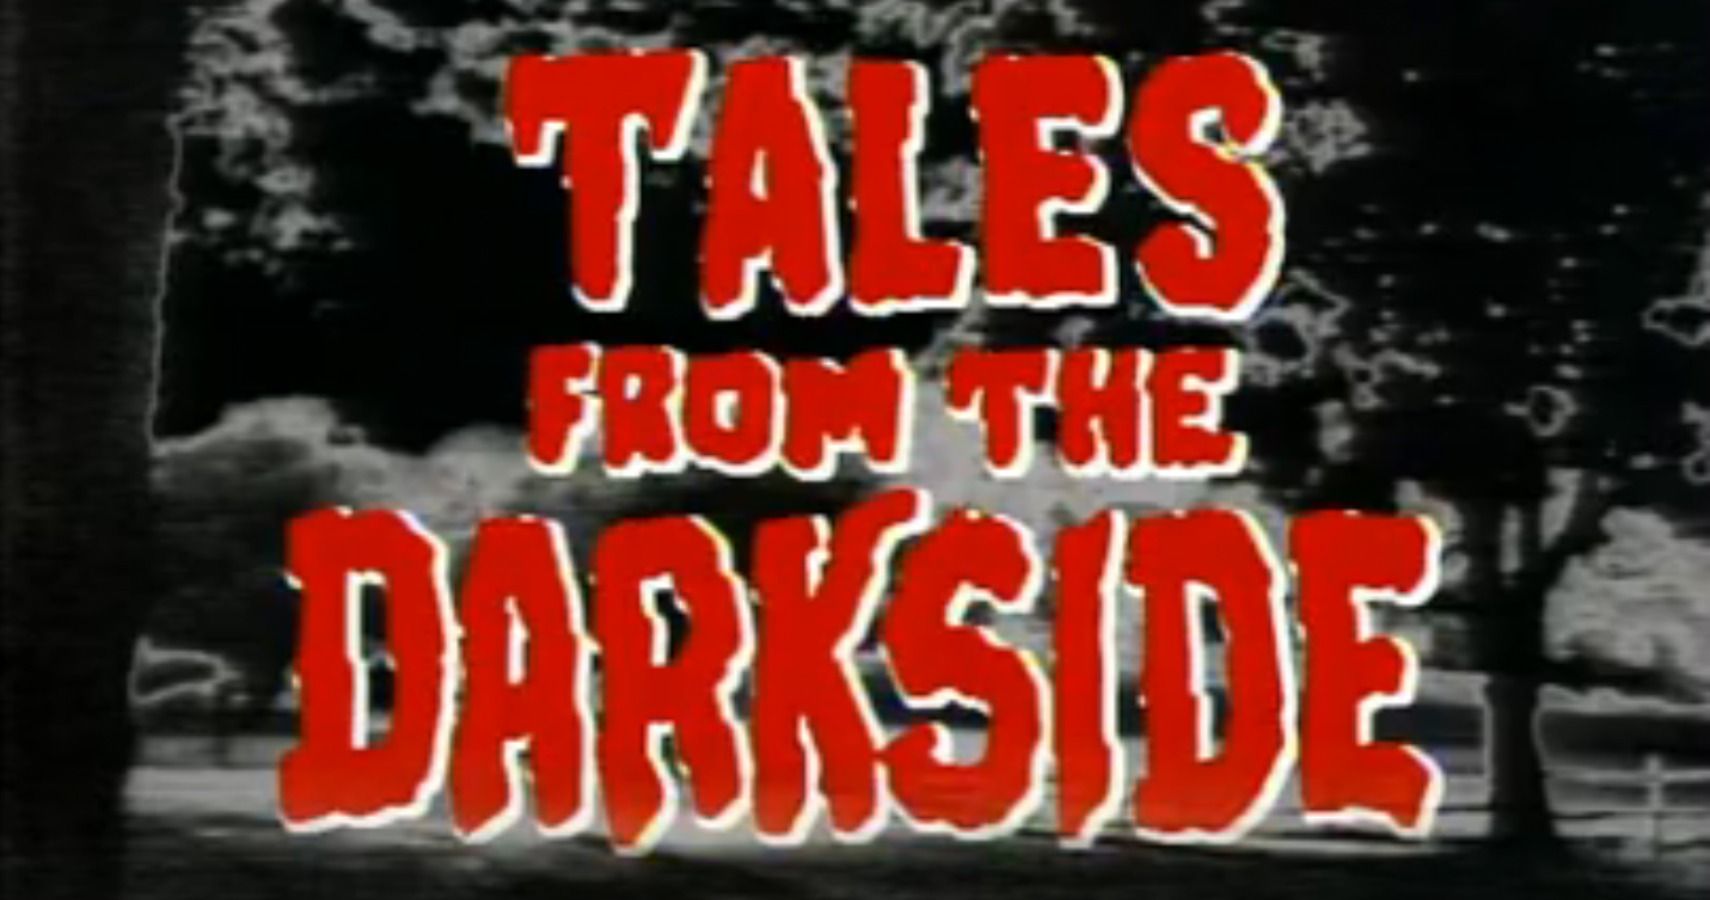 Tales From the Darkside title screen with red writing on black and white background